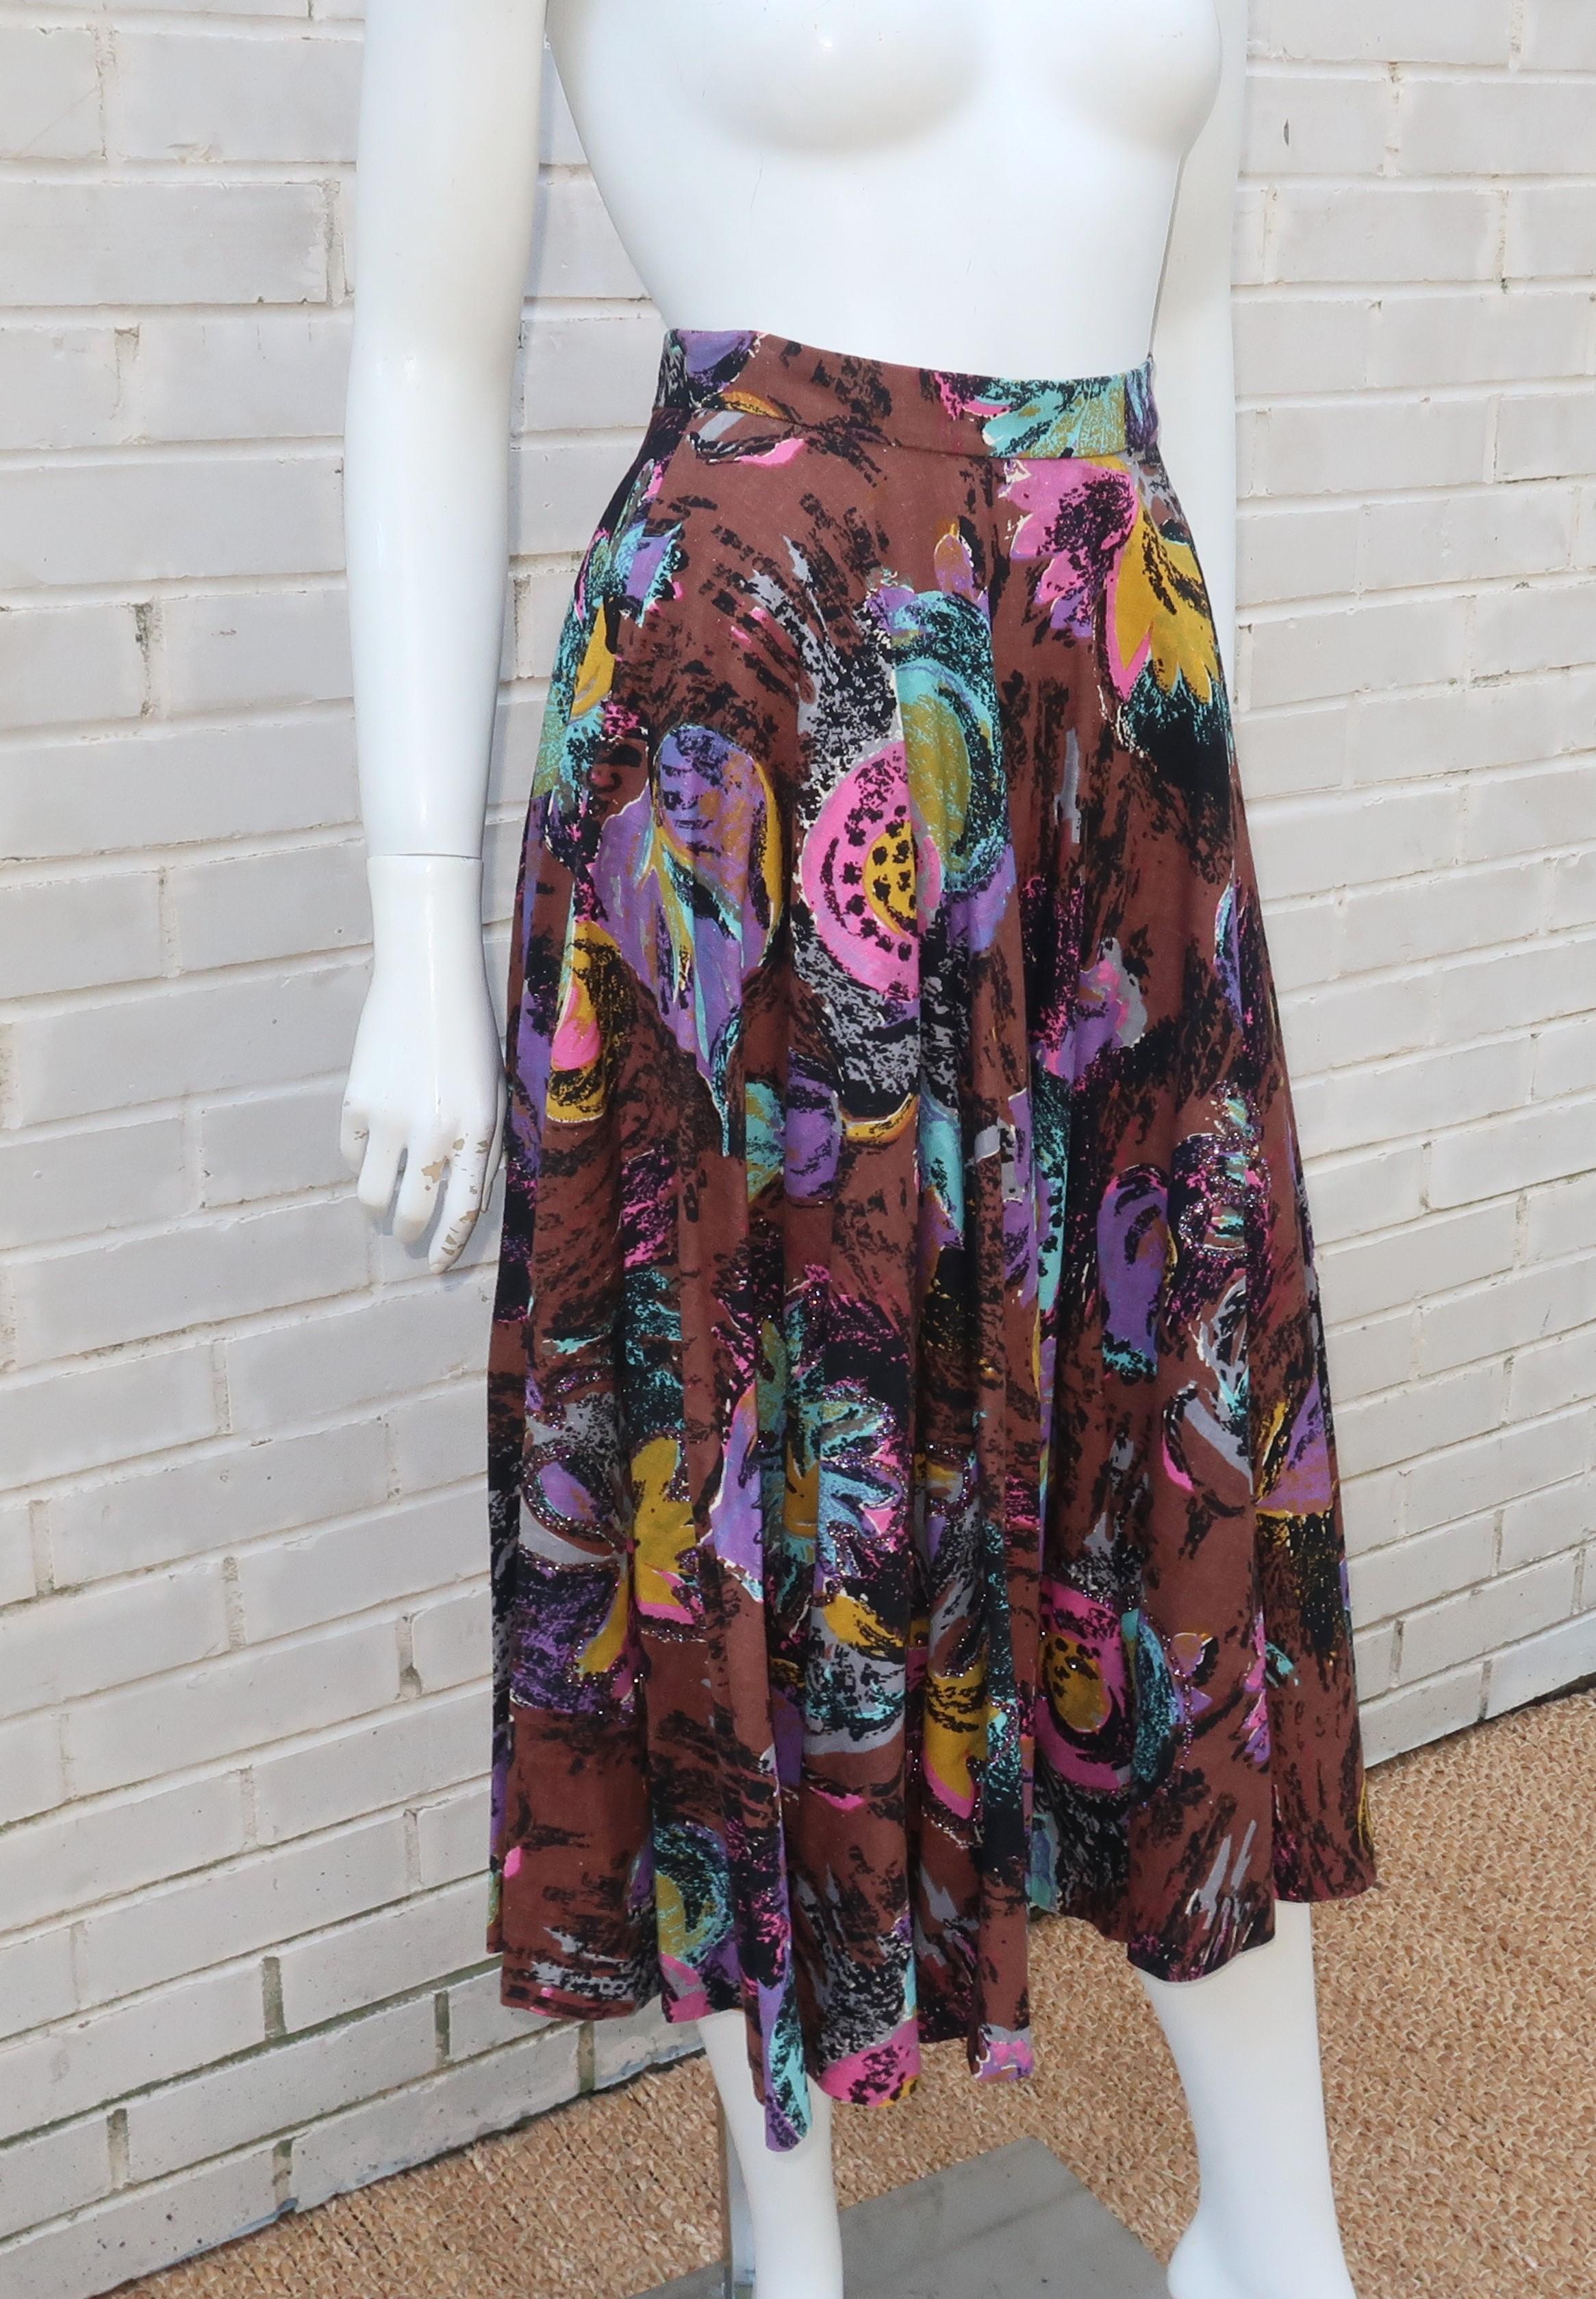 Women's 1950's Circle Swing Skirt With Novelty Glitter Floral Print